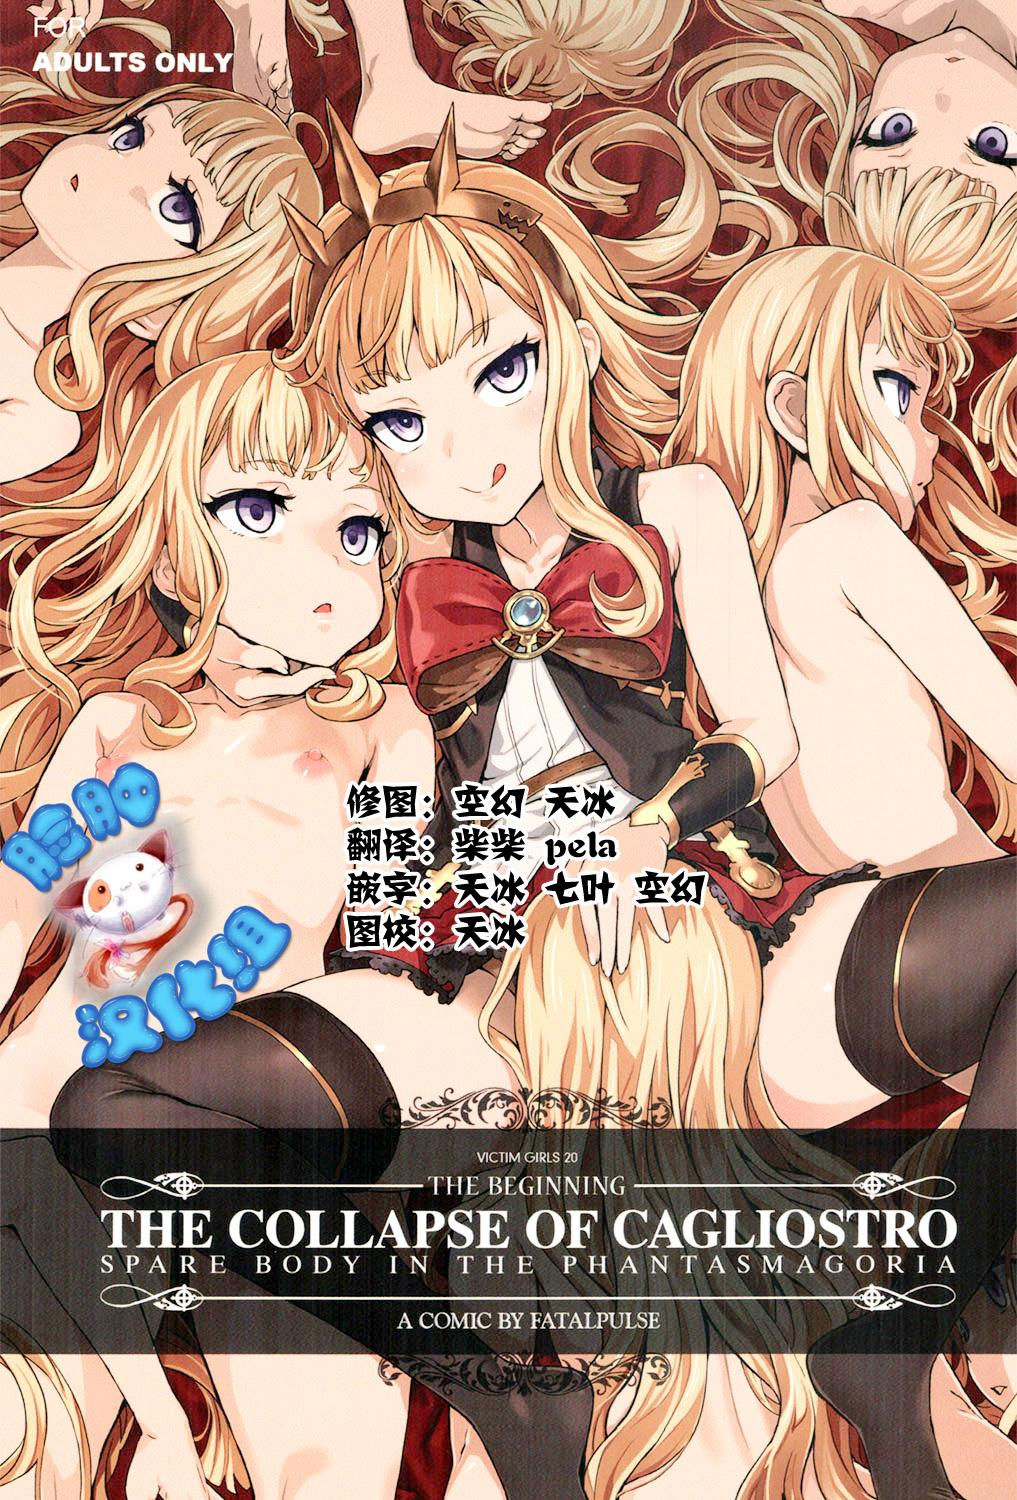 Babysitter Victim Girls 20 THE COLLAPSE OF CAGLIOSTRO - Granblue fantasy Horny - Picture 1